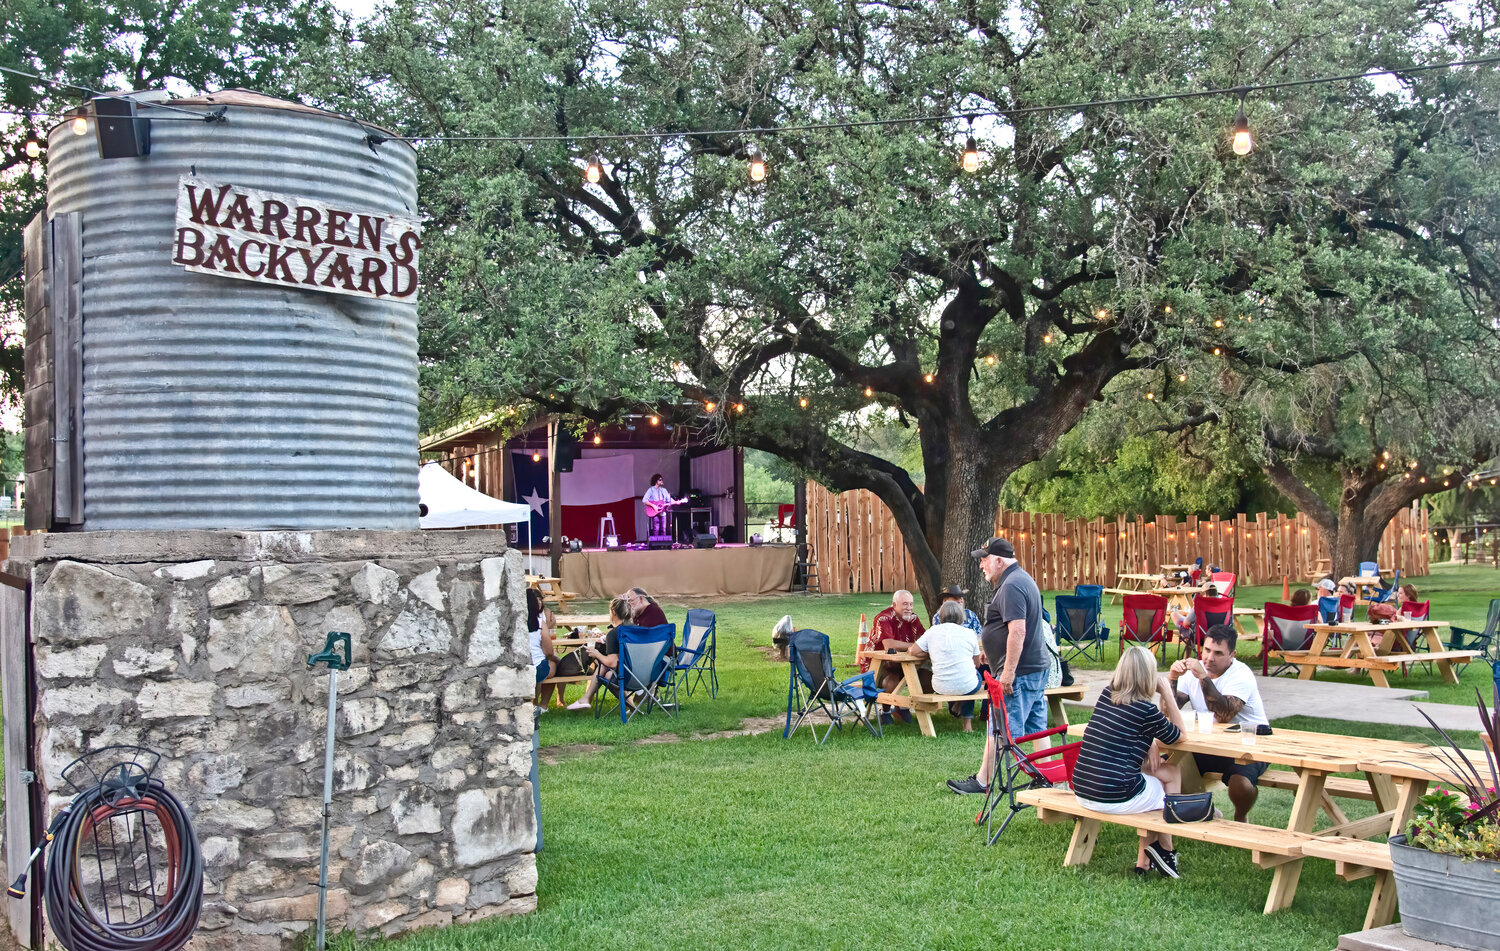 A PLACE TO RELAX: The new Warren's Backyard offers outdoor seating under lighted oak trees and a stage for live band performances.